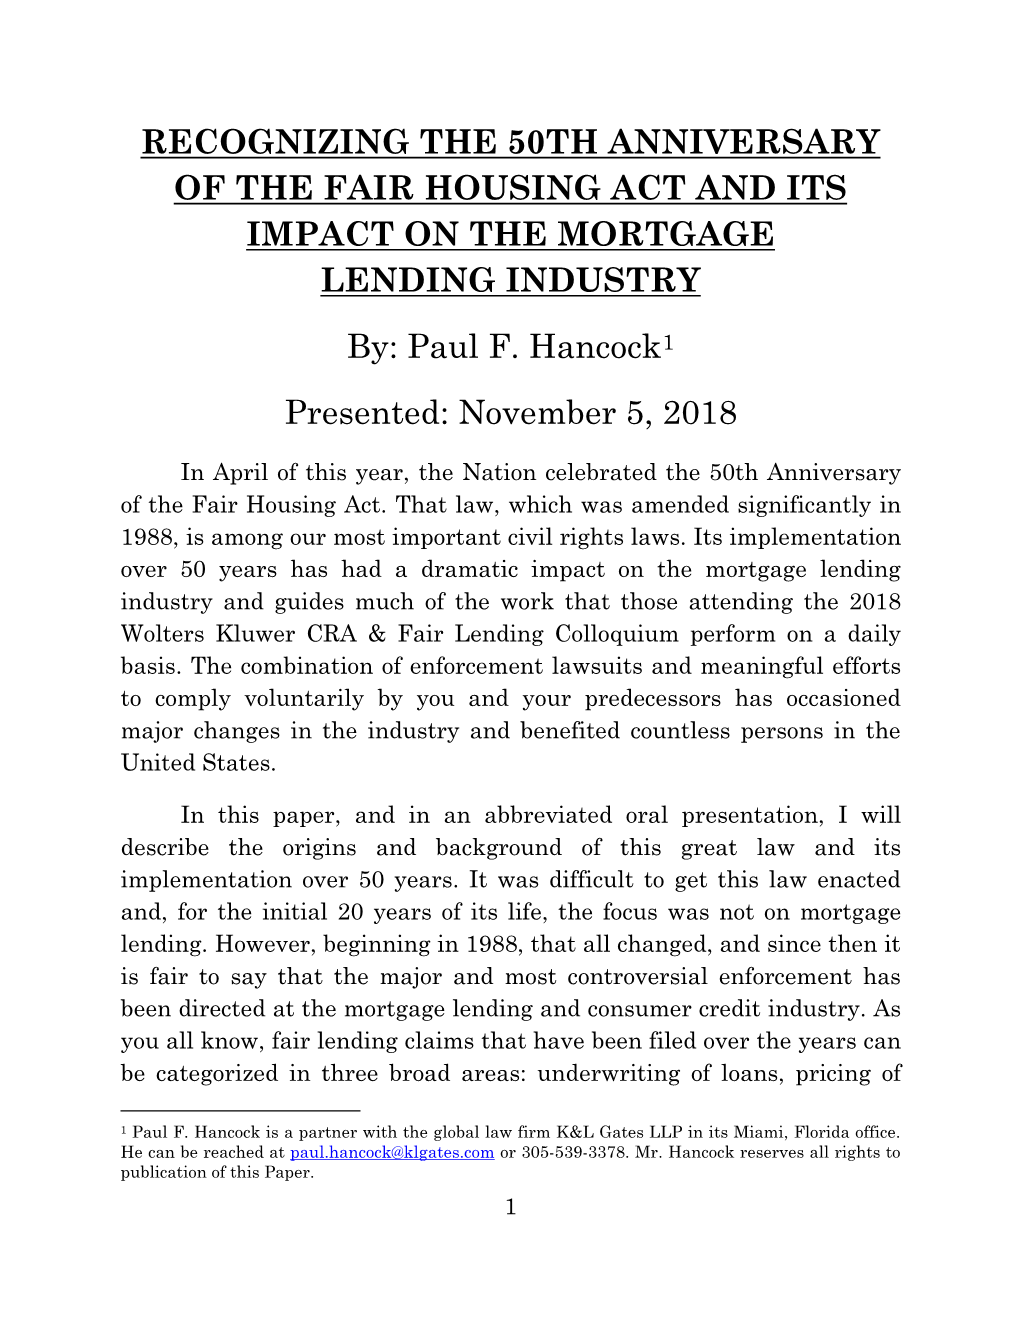 RECOGNIZING the 50TH ANNIVERSARY of the FAIR HOUSING ACT and ITS IMPACT on the MORTGAGE LENDING INDUSTRY By: Paul F. Hancock1 Presented: November 5, 2018